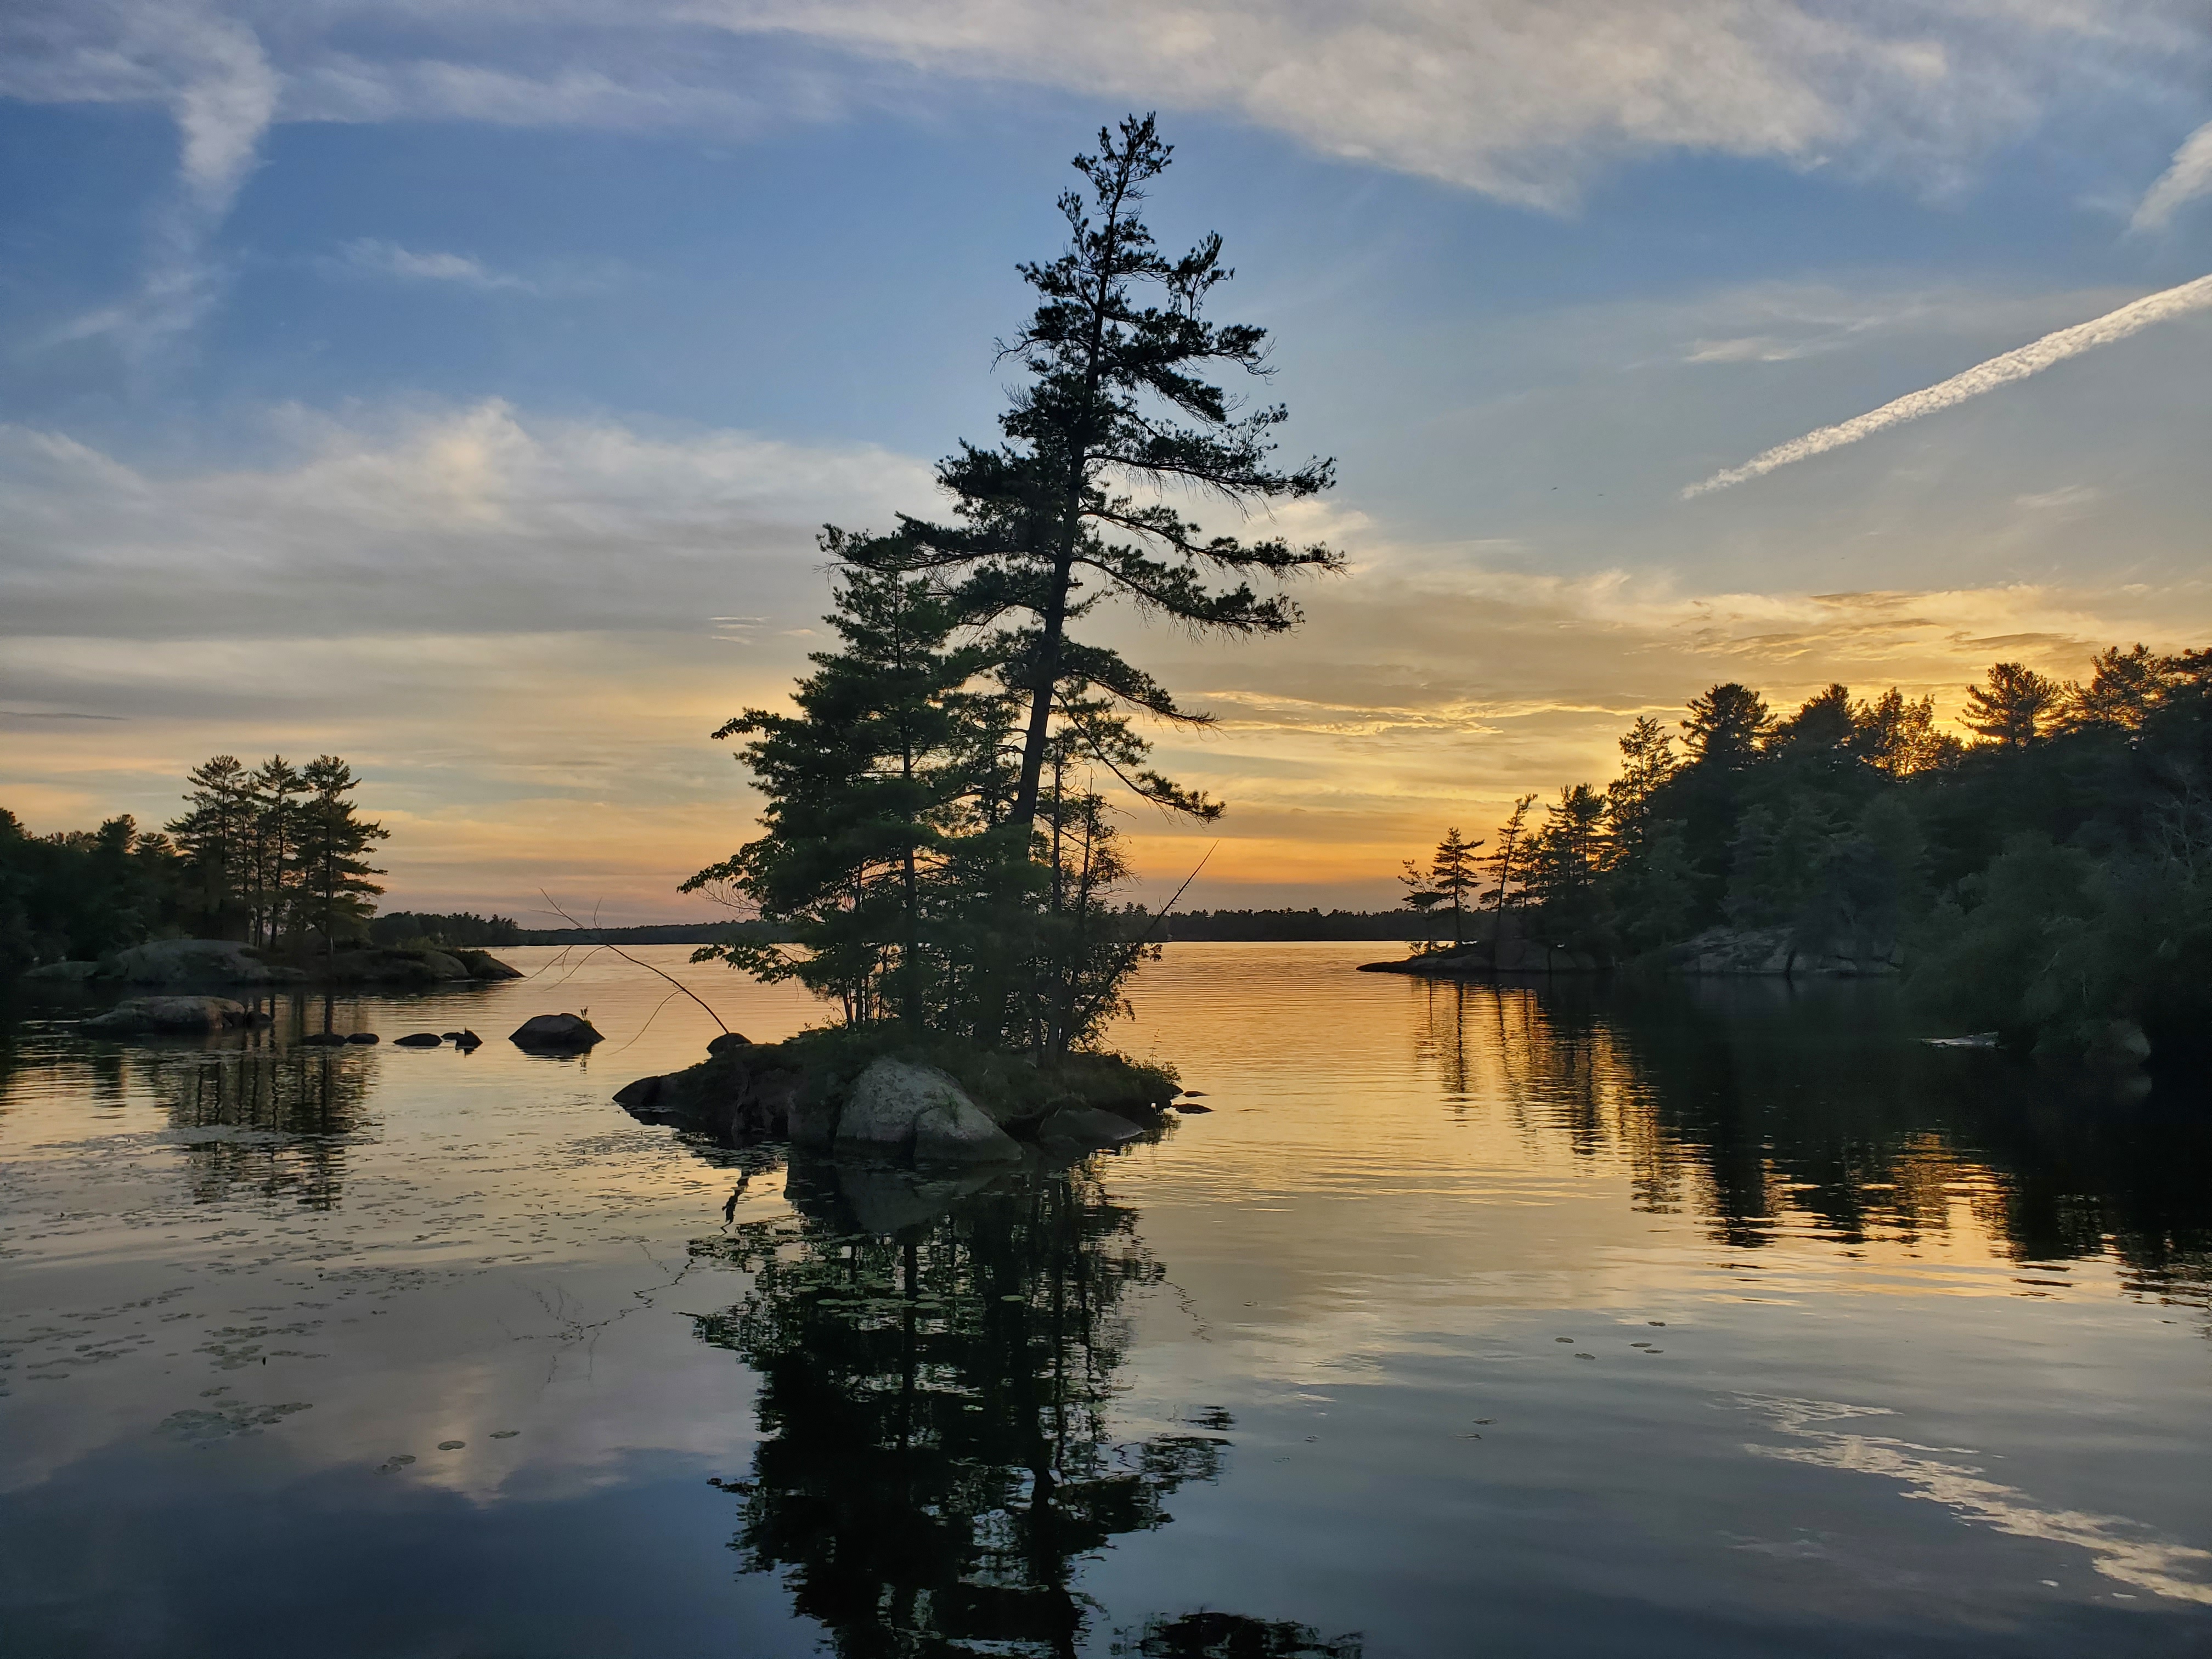 Sunset on very calm lake over looking pine trees